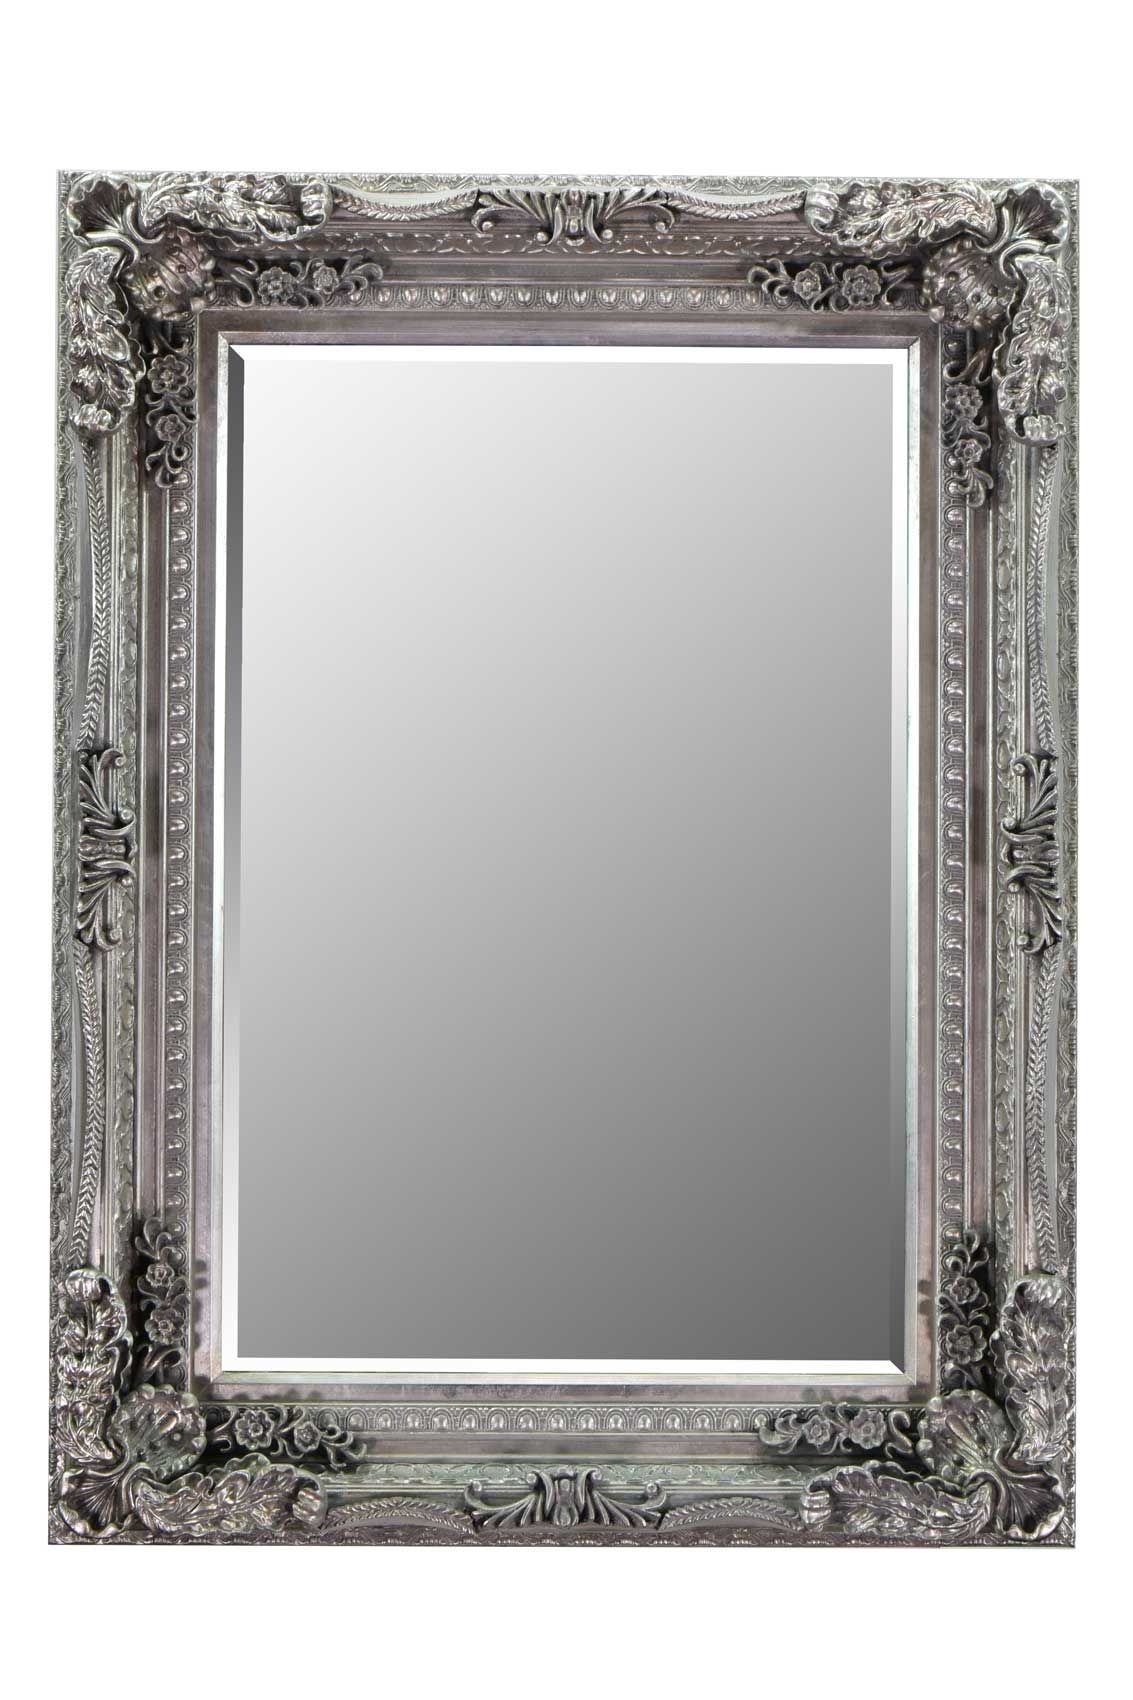 Bordeaux Silver Ornate Wall Mirror 24x36 – Ayers And Graces With Regard To Silver High Wall Mirrors (View 3 of 15)